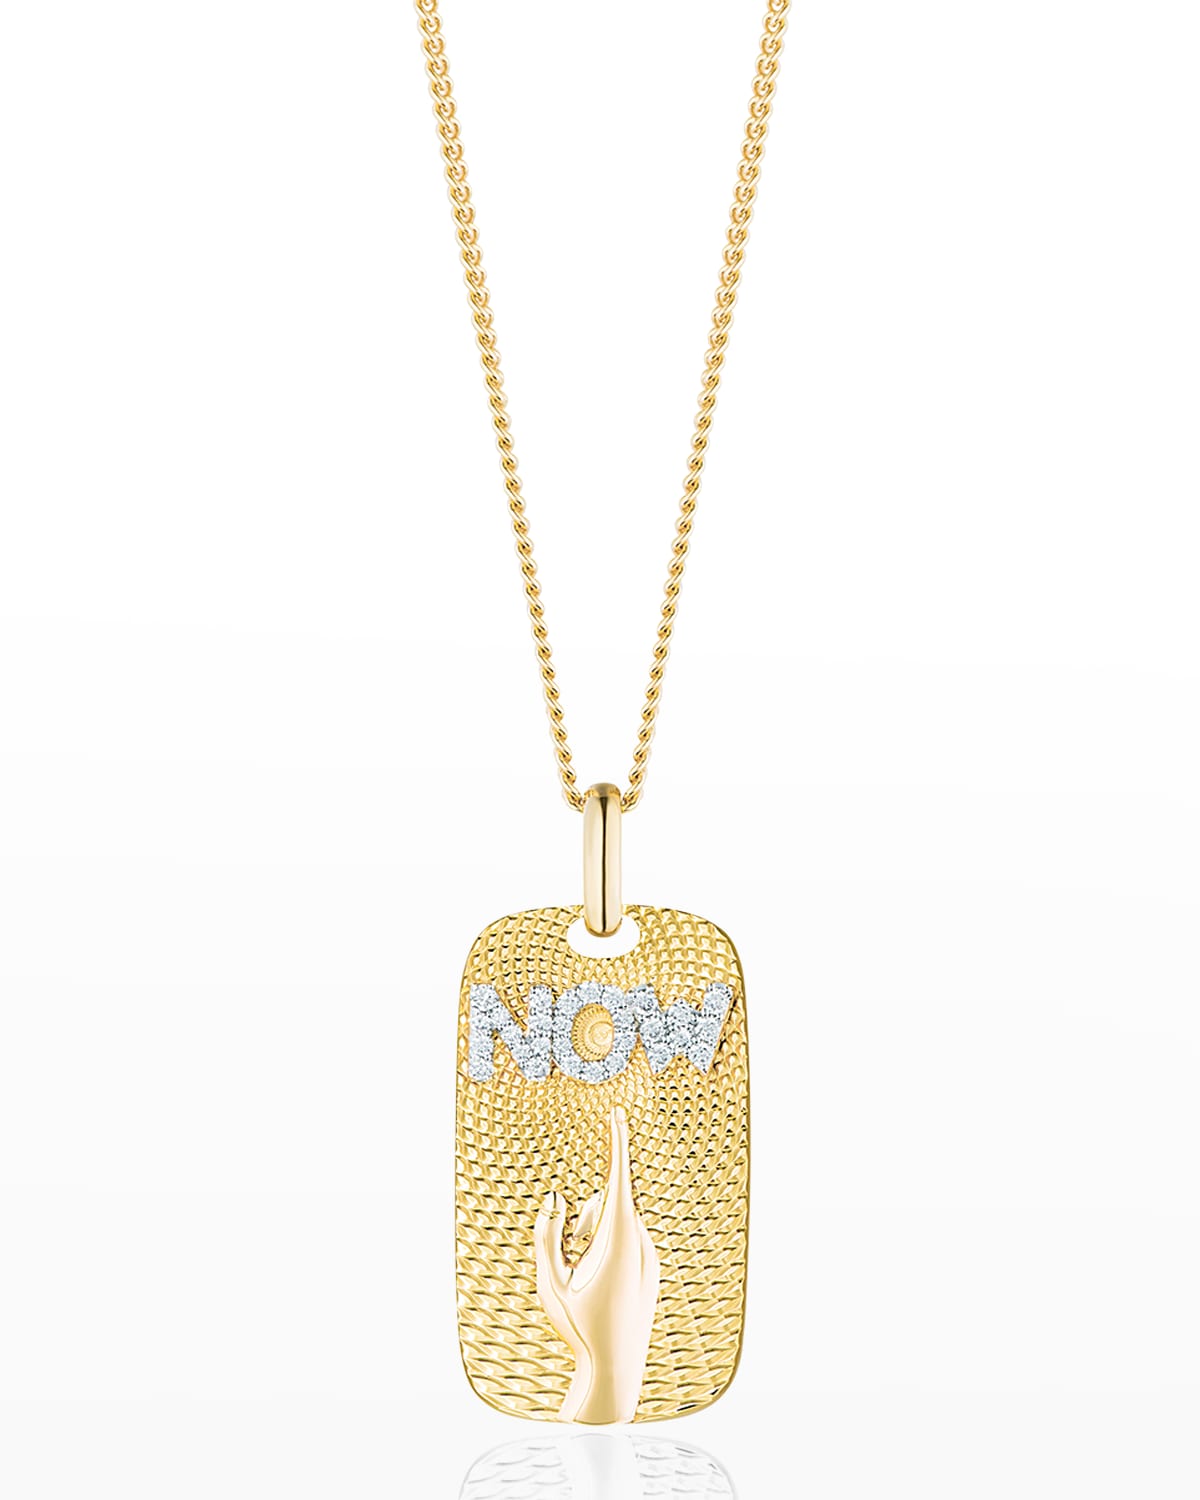 Awkn1 Now Tag Necklace